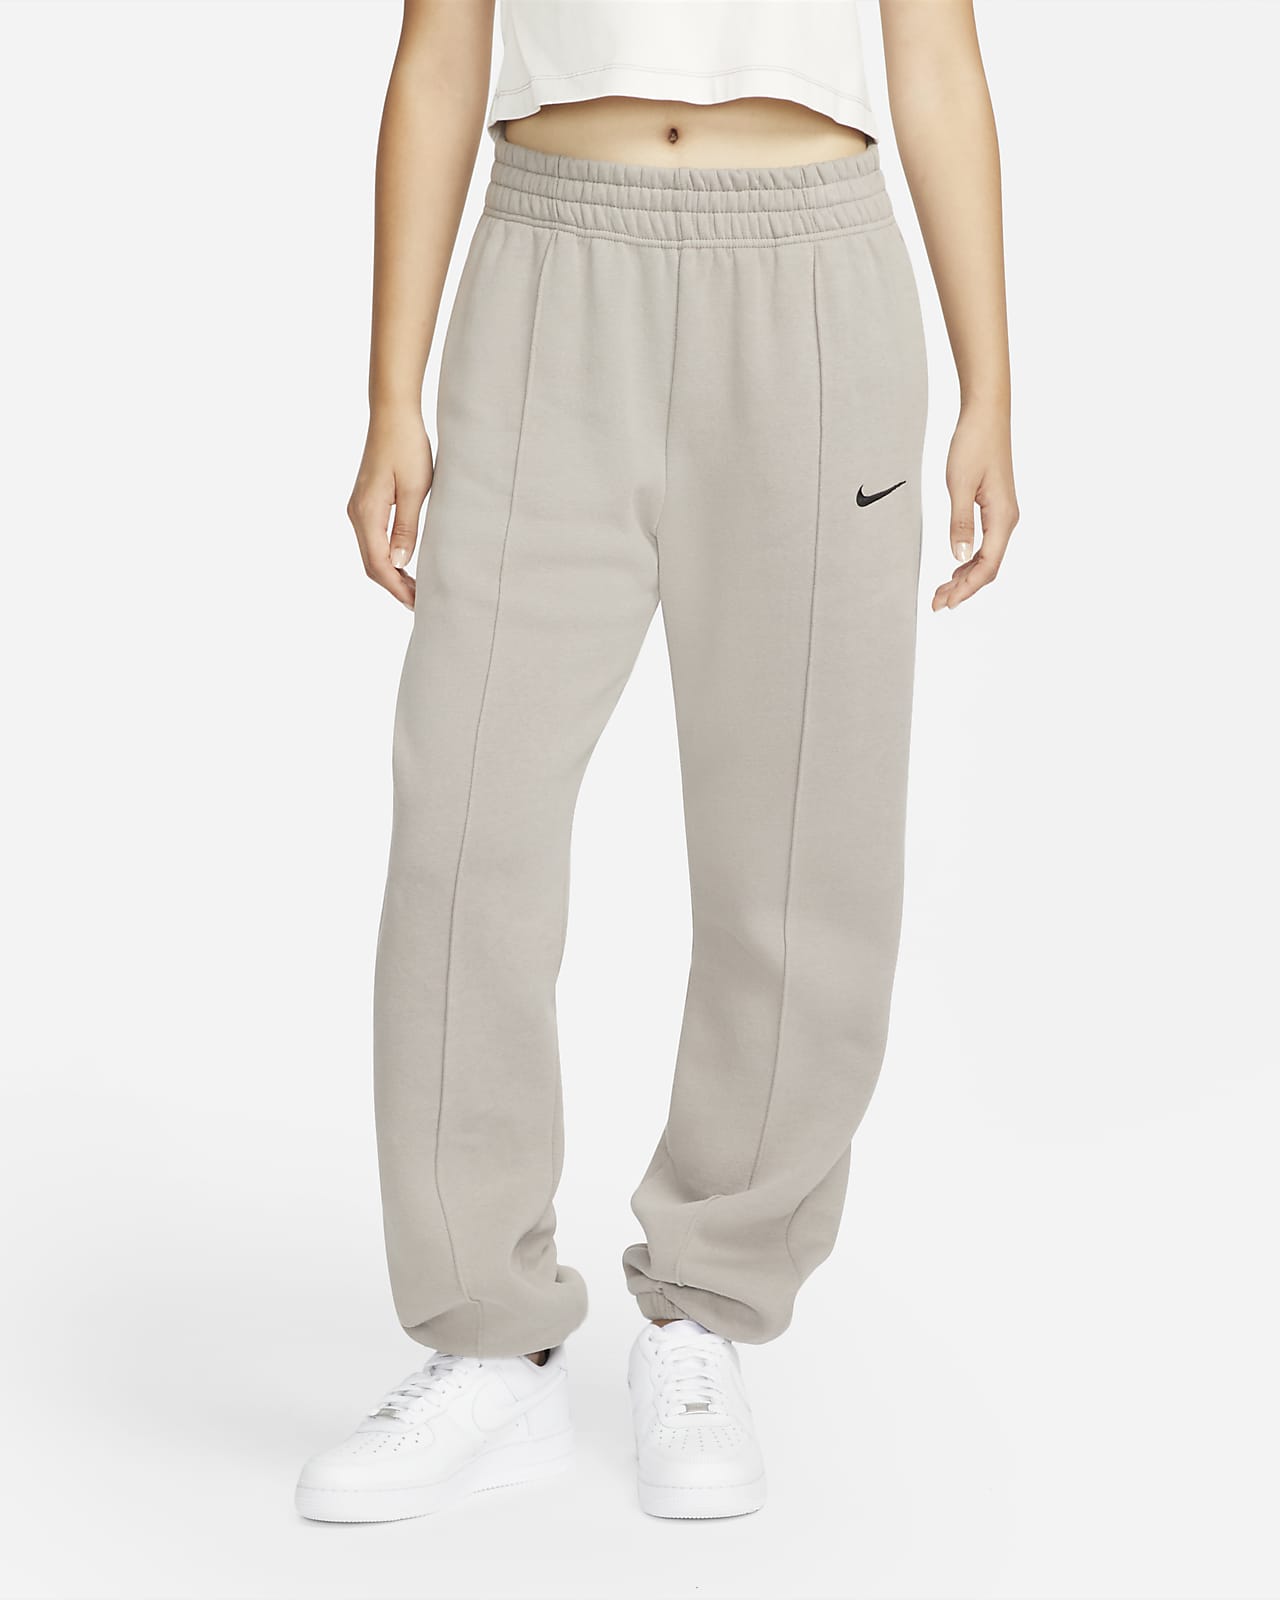 Nike Sportswear Collection Essentials - Mujer. Nike